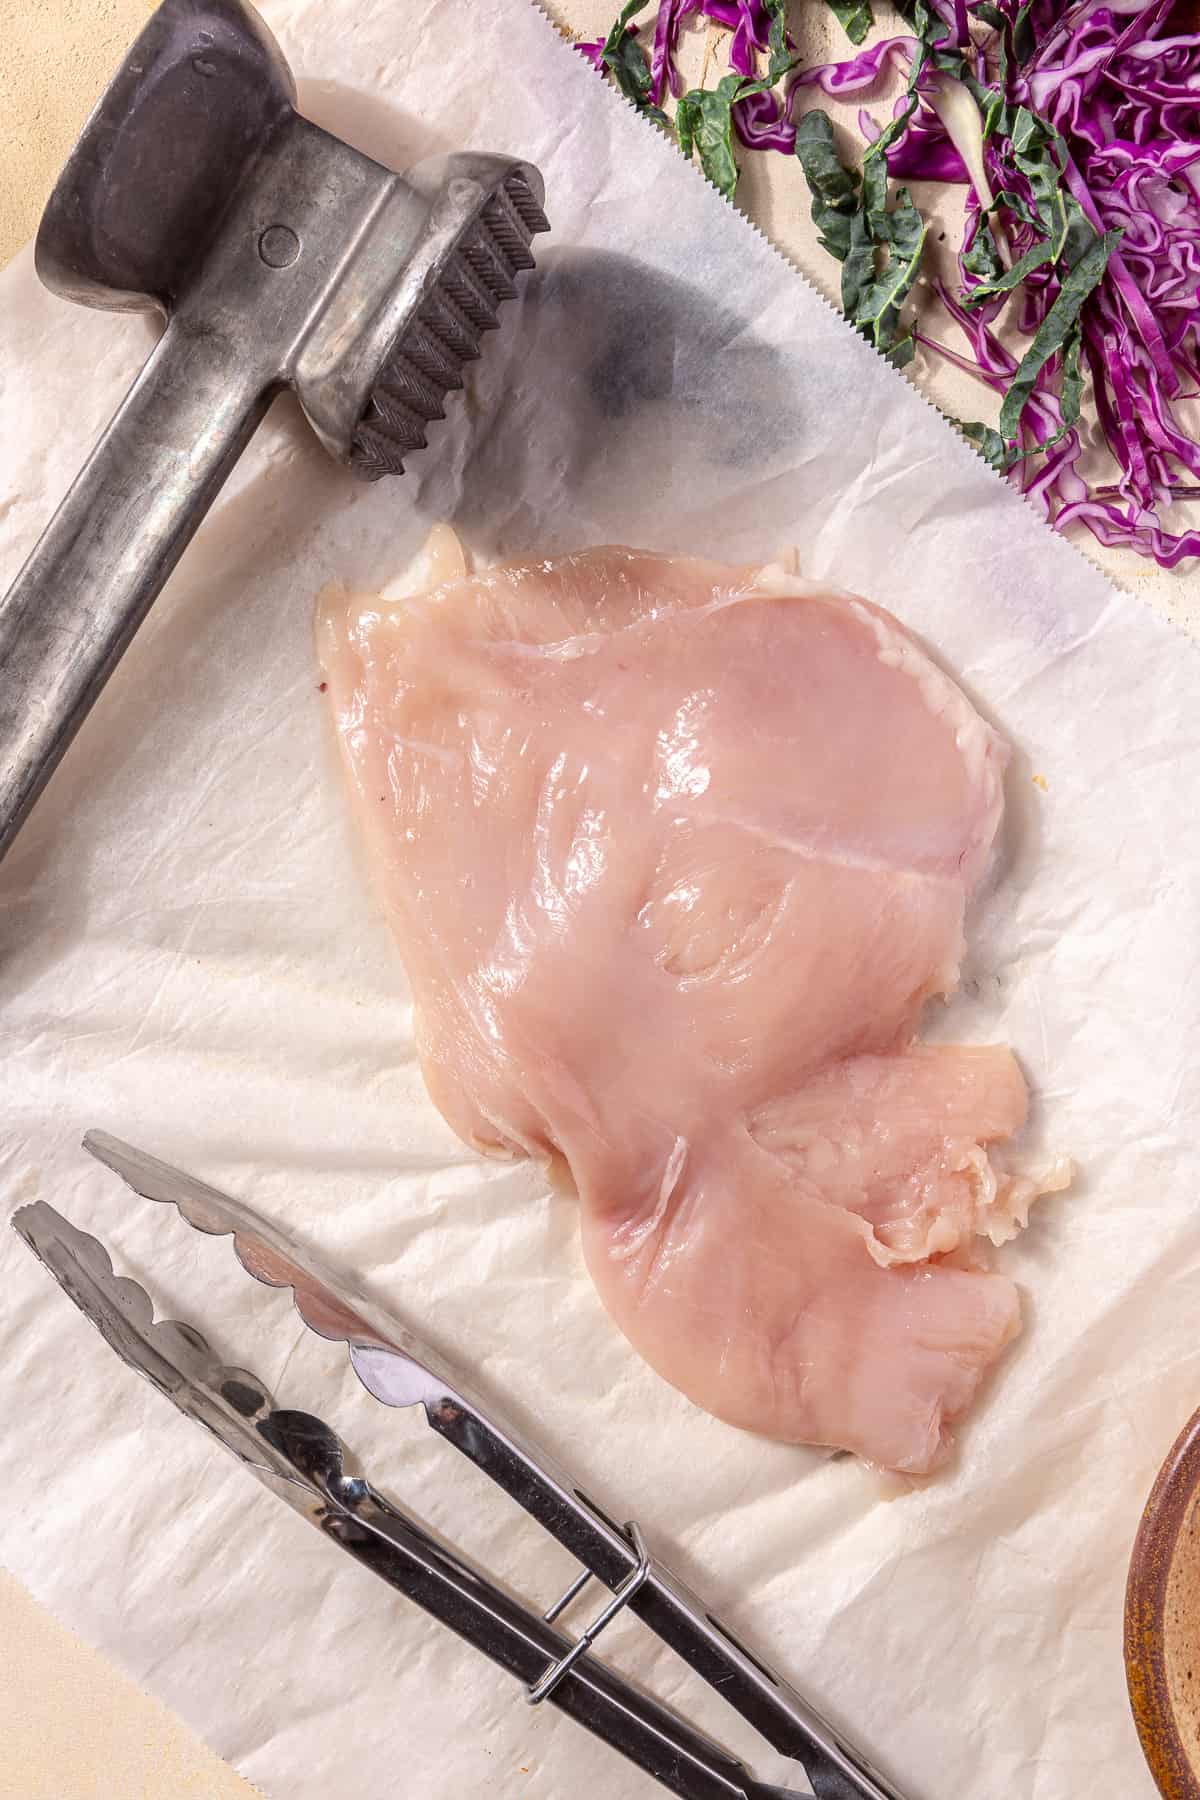 Raw chicken breast on sheet of parchment with meat mallet next to it.